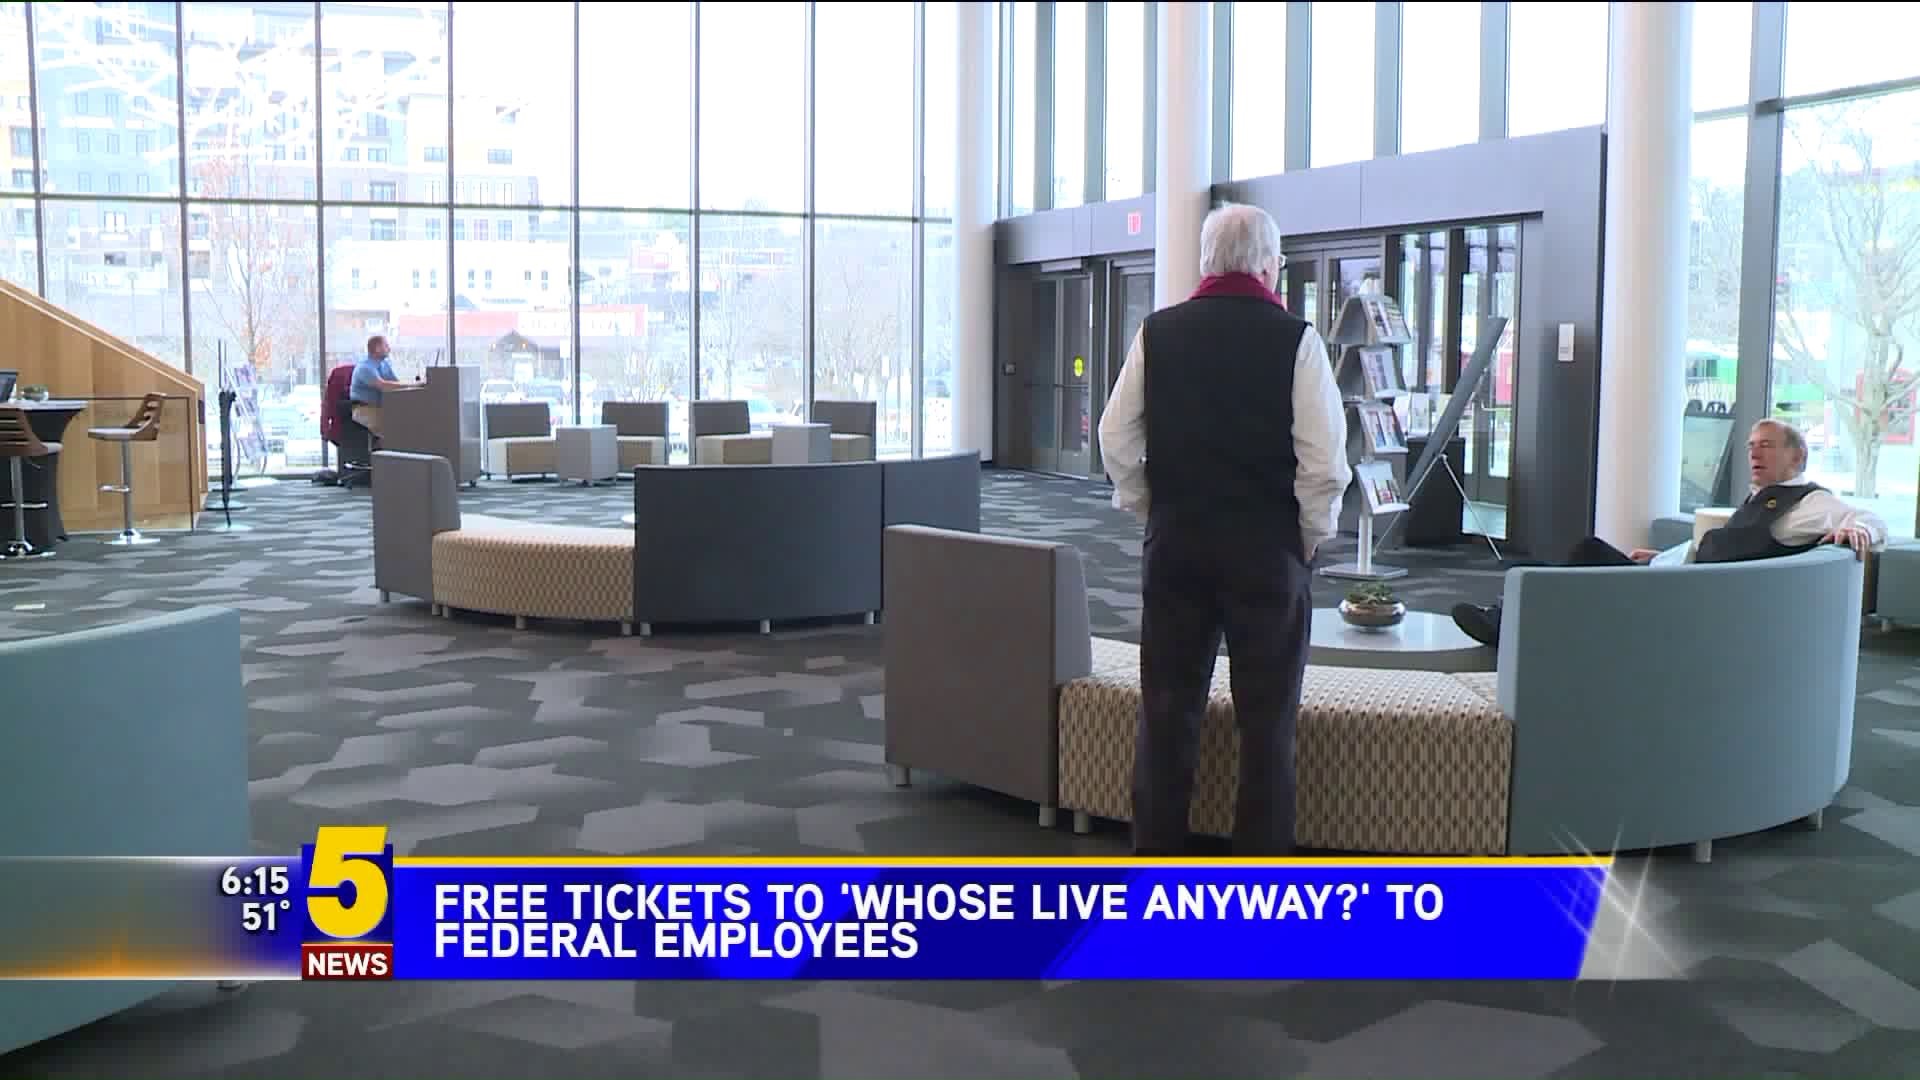 Free Tickets To "Whose Live Anyway" To Federal Employees